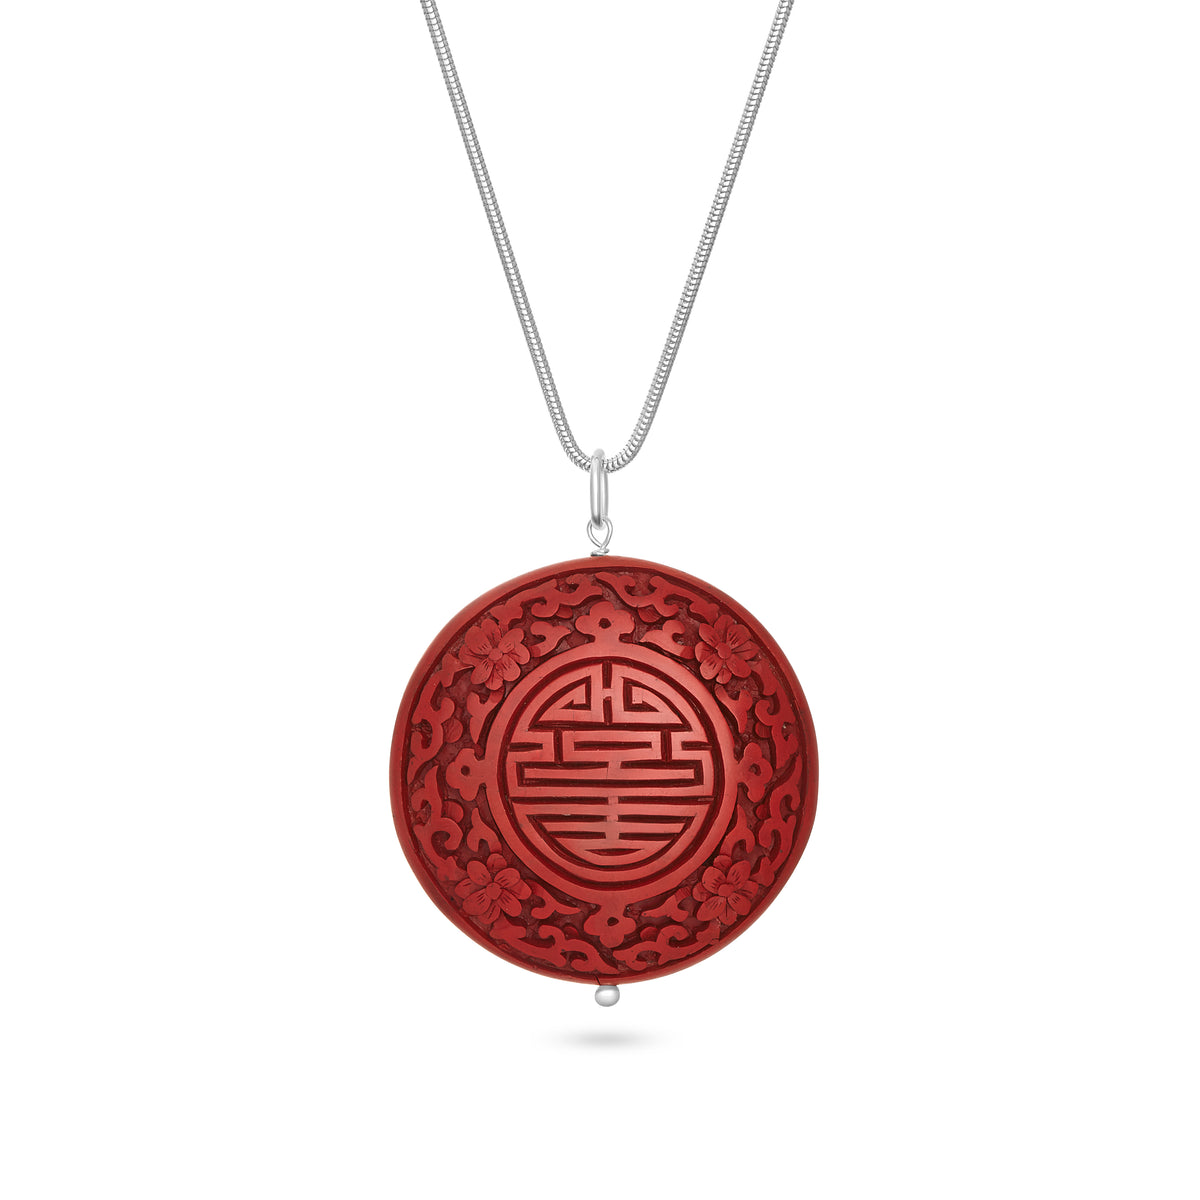 VIKAjewels CHINESE NECKLACE this necklace was inspired by travelling through Hong Kong the pendant is Ø5.5cm cinnabar carved wood silver details were made from 925 recycled sterling silver available with 60cm Snake chain and 50cm link chain handmade in Bali